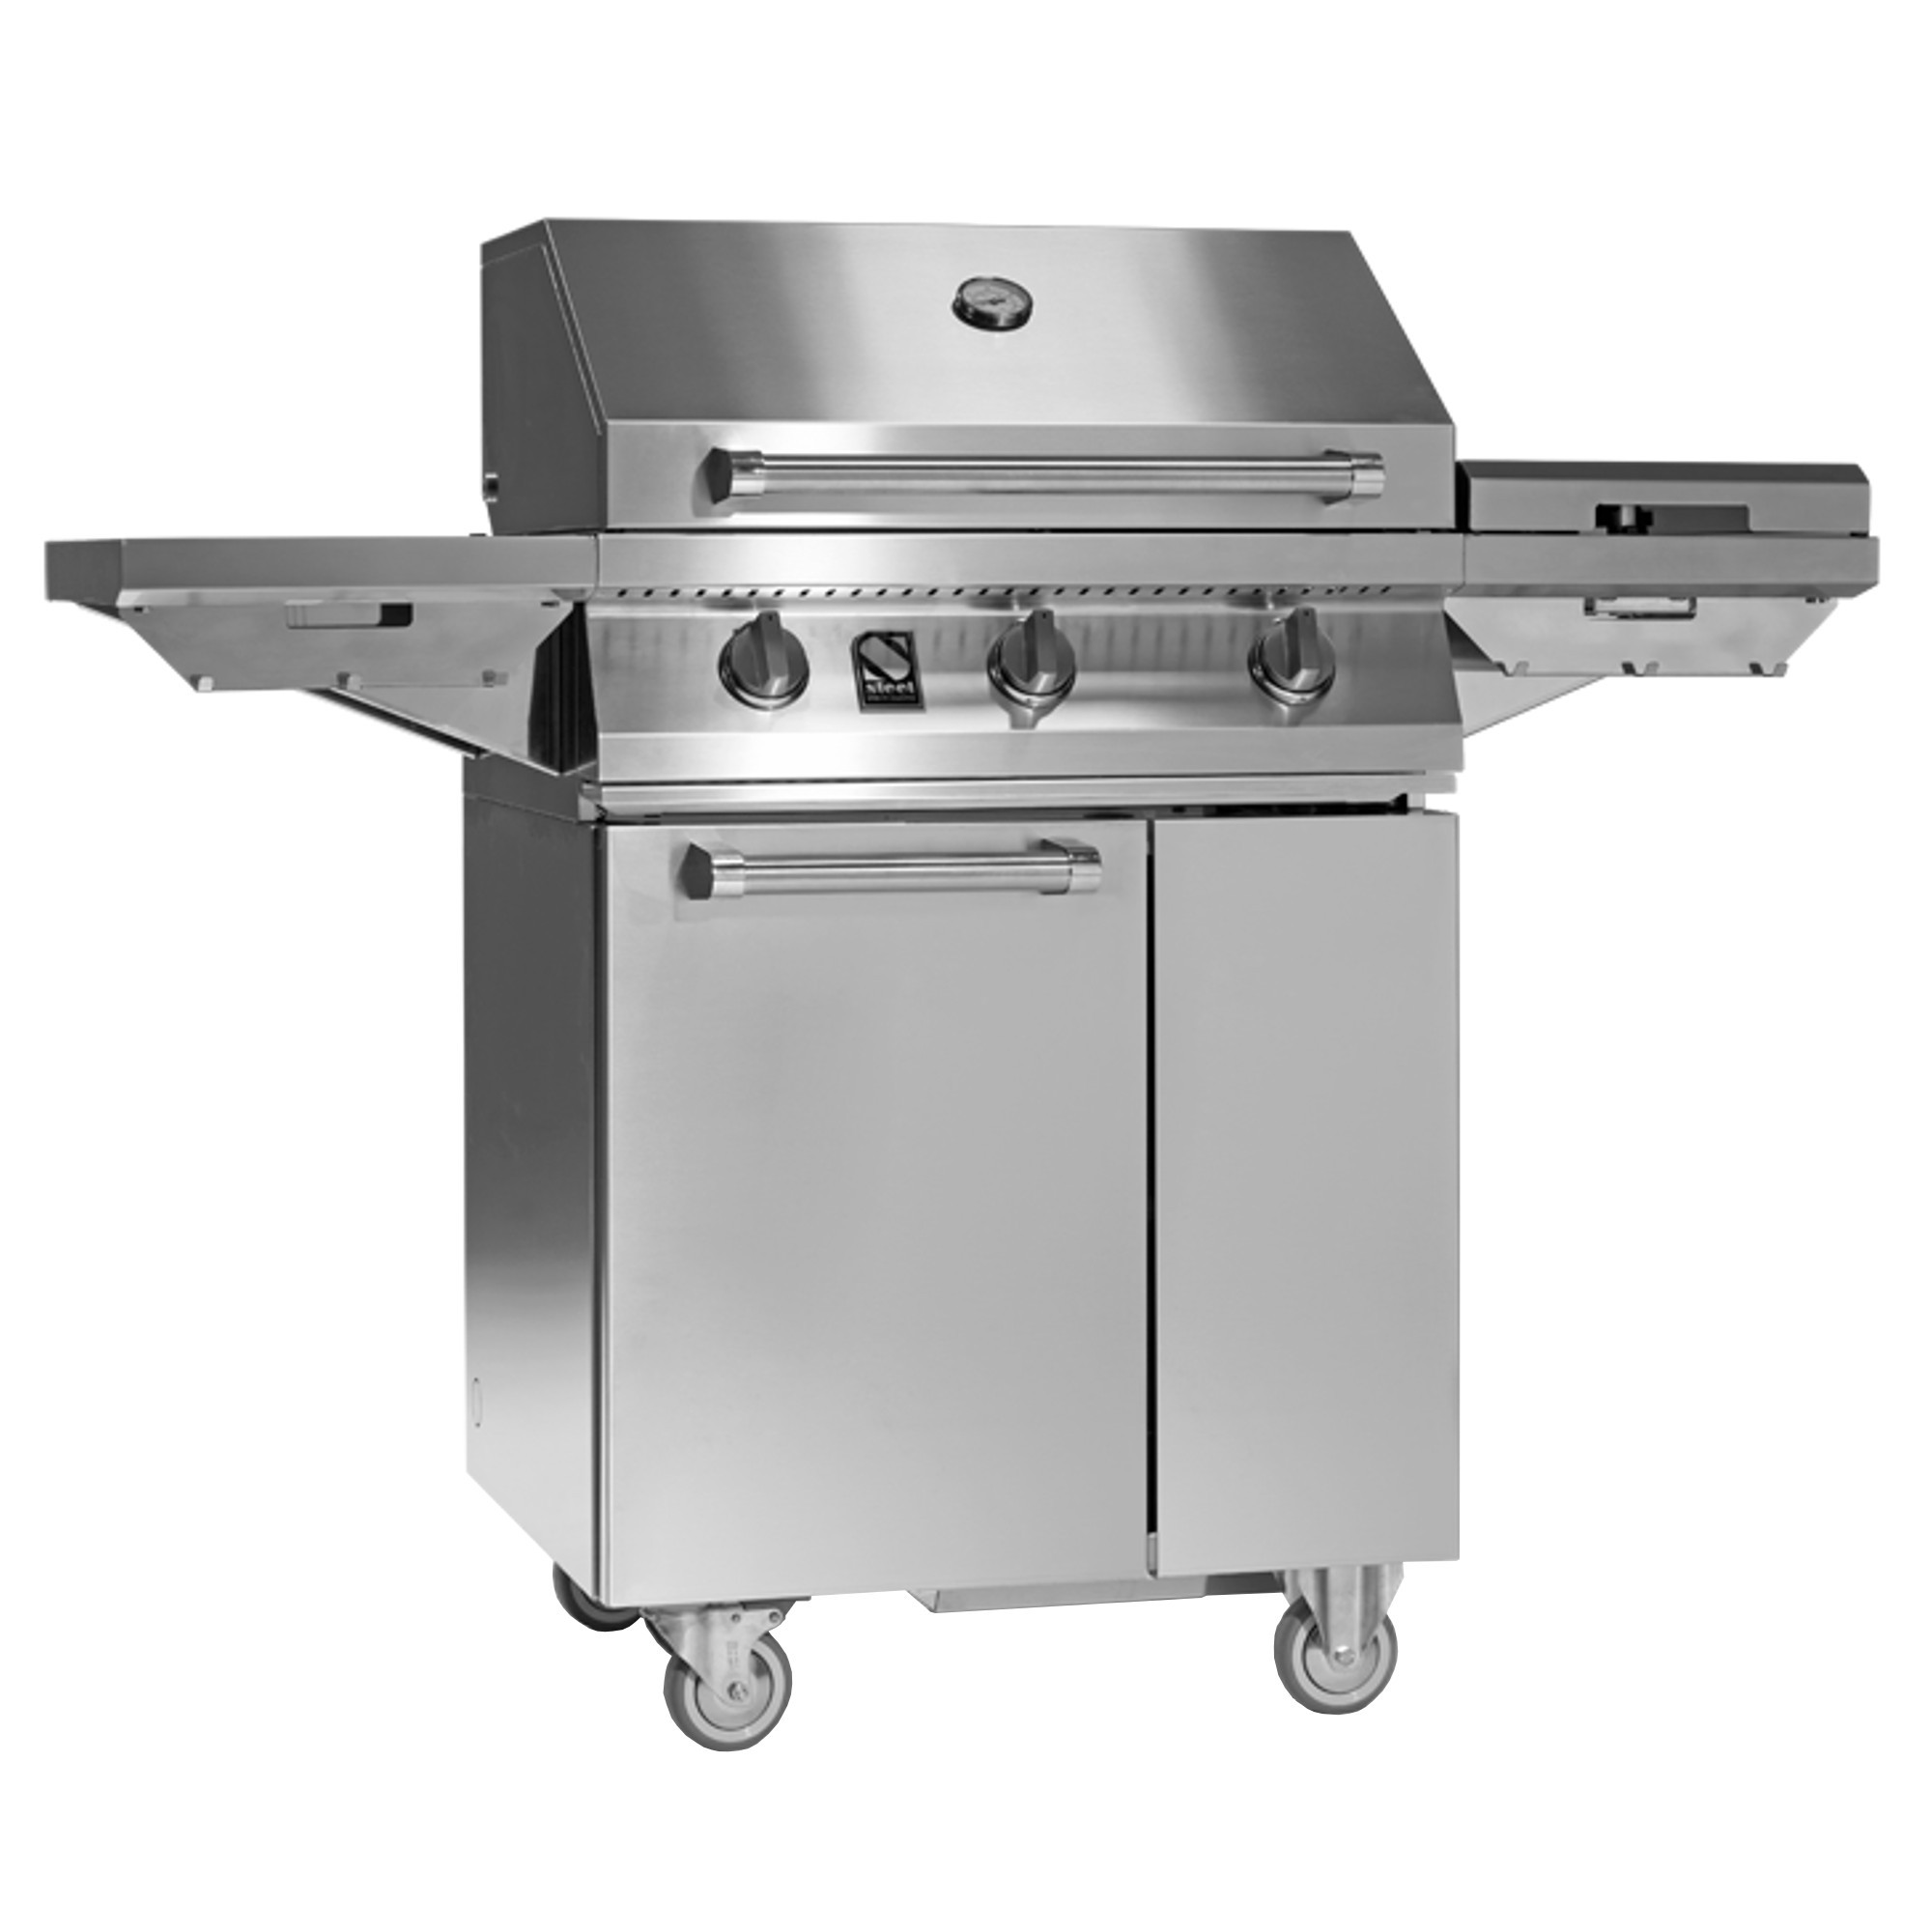 SWING BUILT-IN BBQ, Gas Barbecue, Cooking system